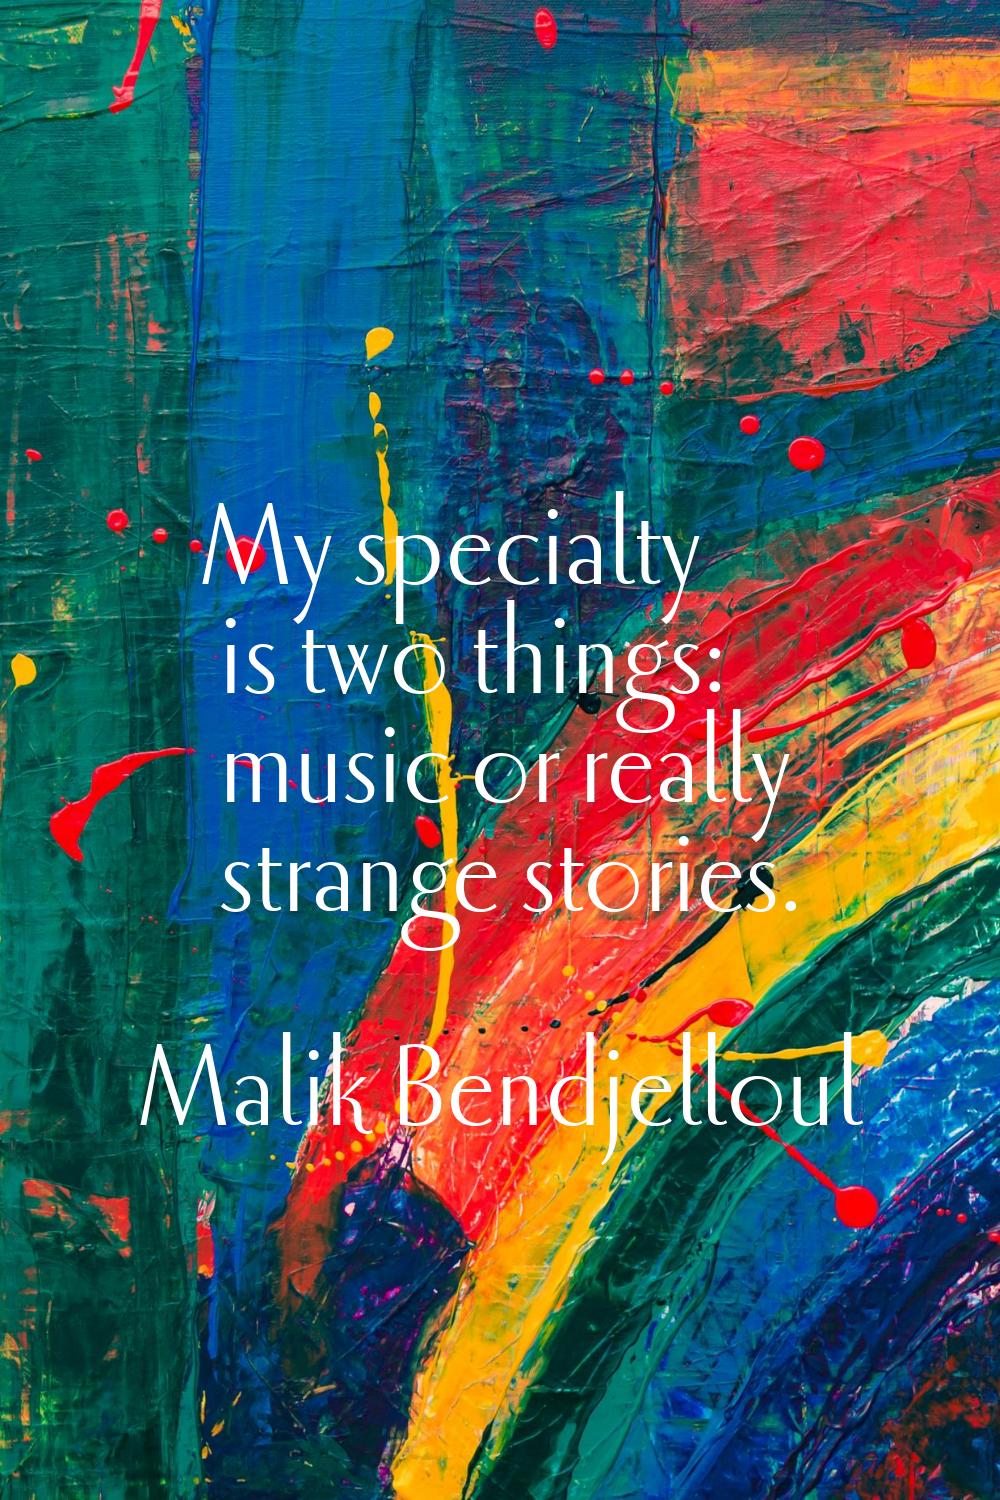 My specialty is two things: music or really strange stories.